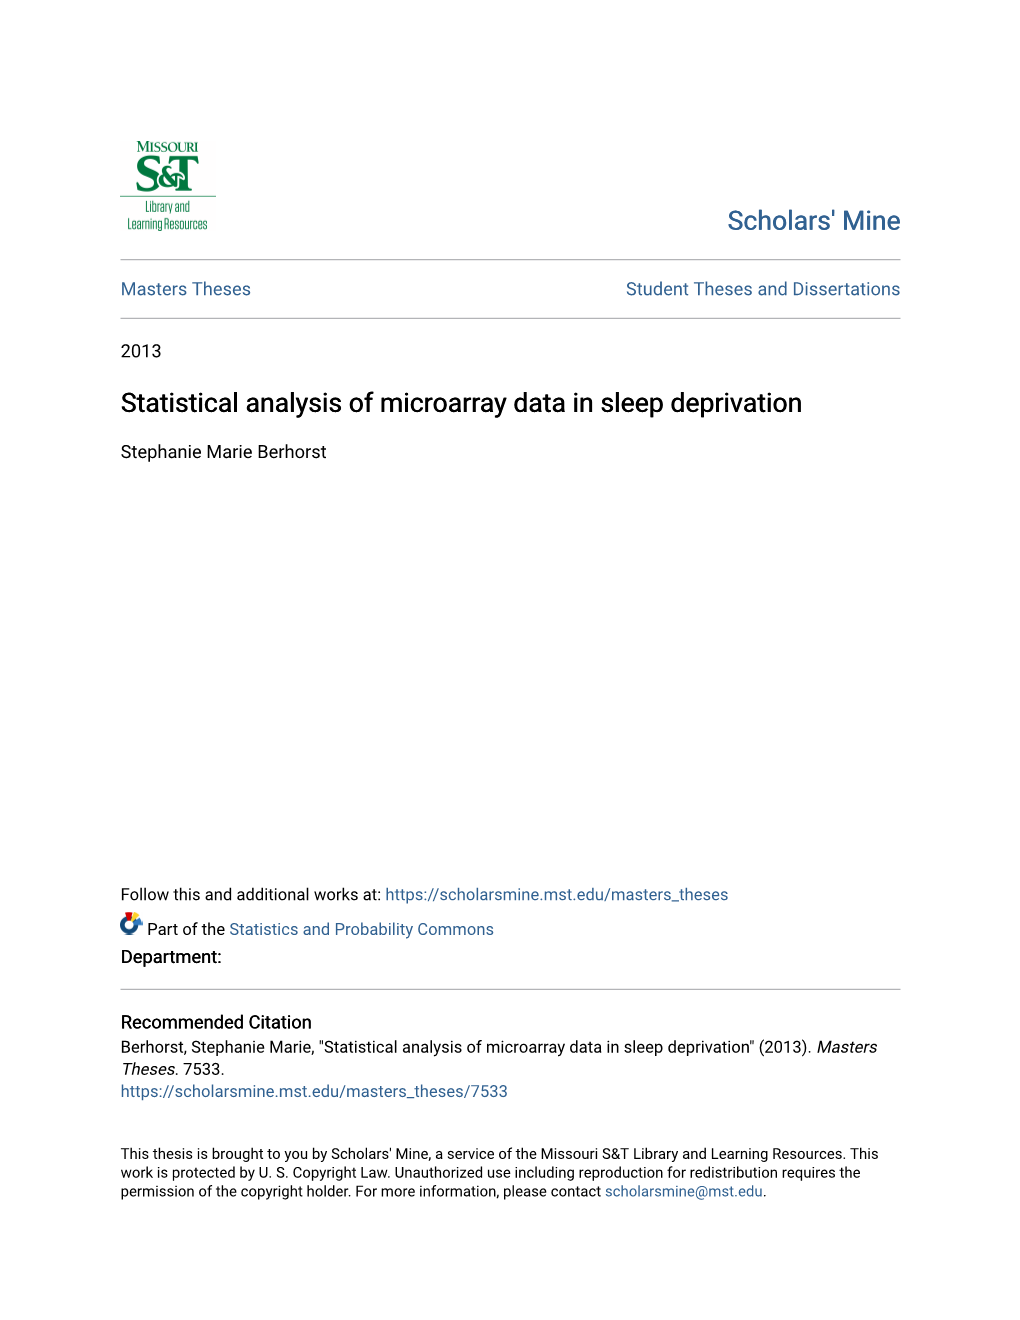 Statistical Analysis of Microarray Data in Sleep Deprivation